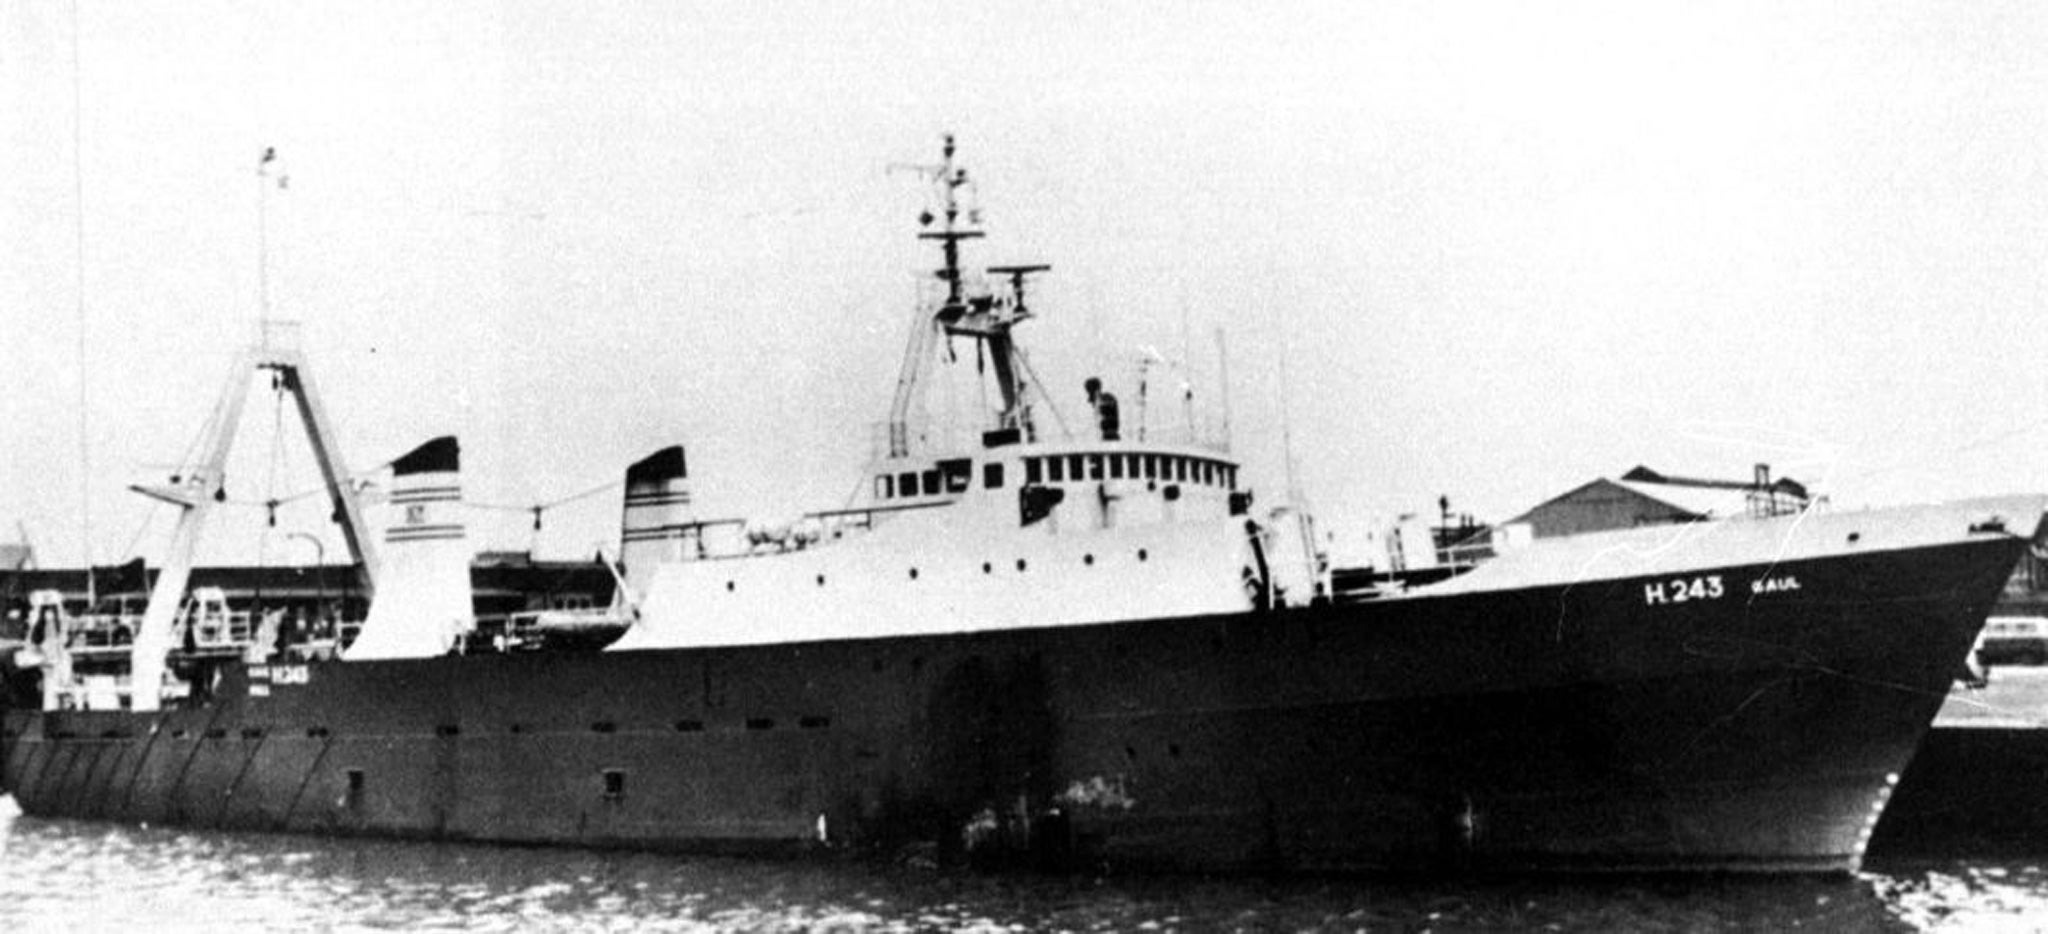 The Hull-based trawler, the Gaul, which sank in 1974. Tests are being carried out to discover whether human remains found in Russia are those of missing sailors from the trawler that went down in the Barents Sea off Norway with the loss of 36 men